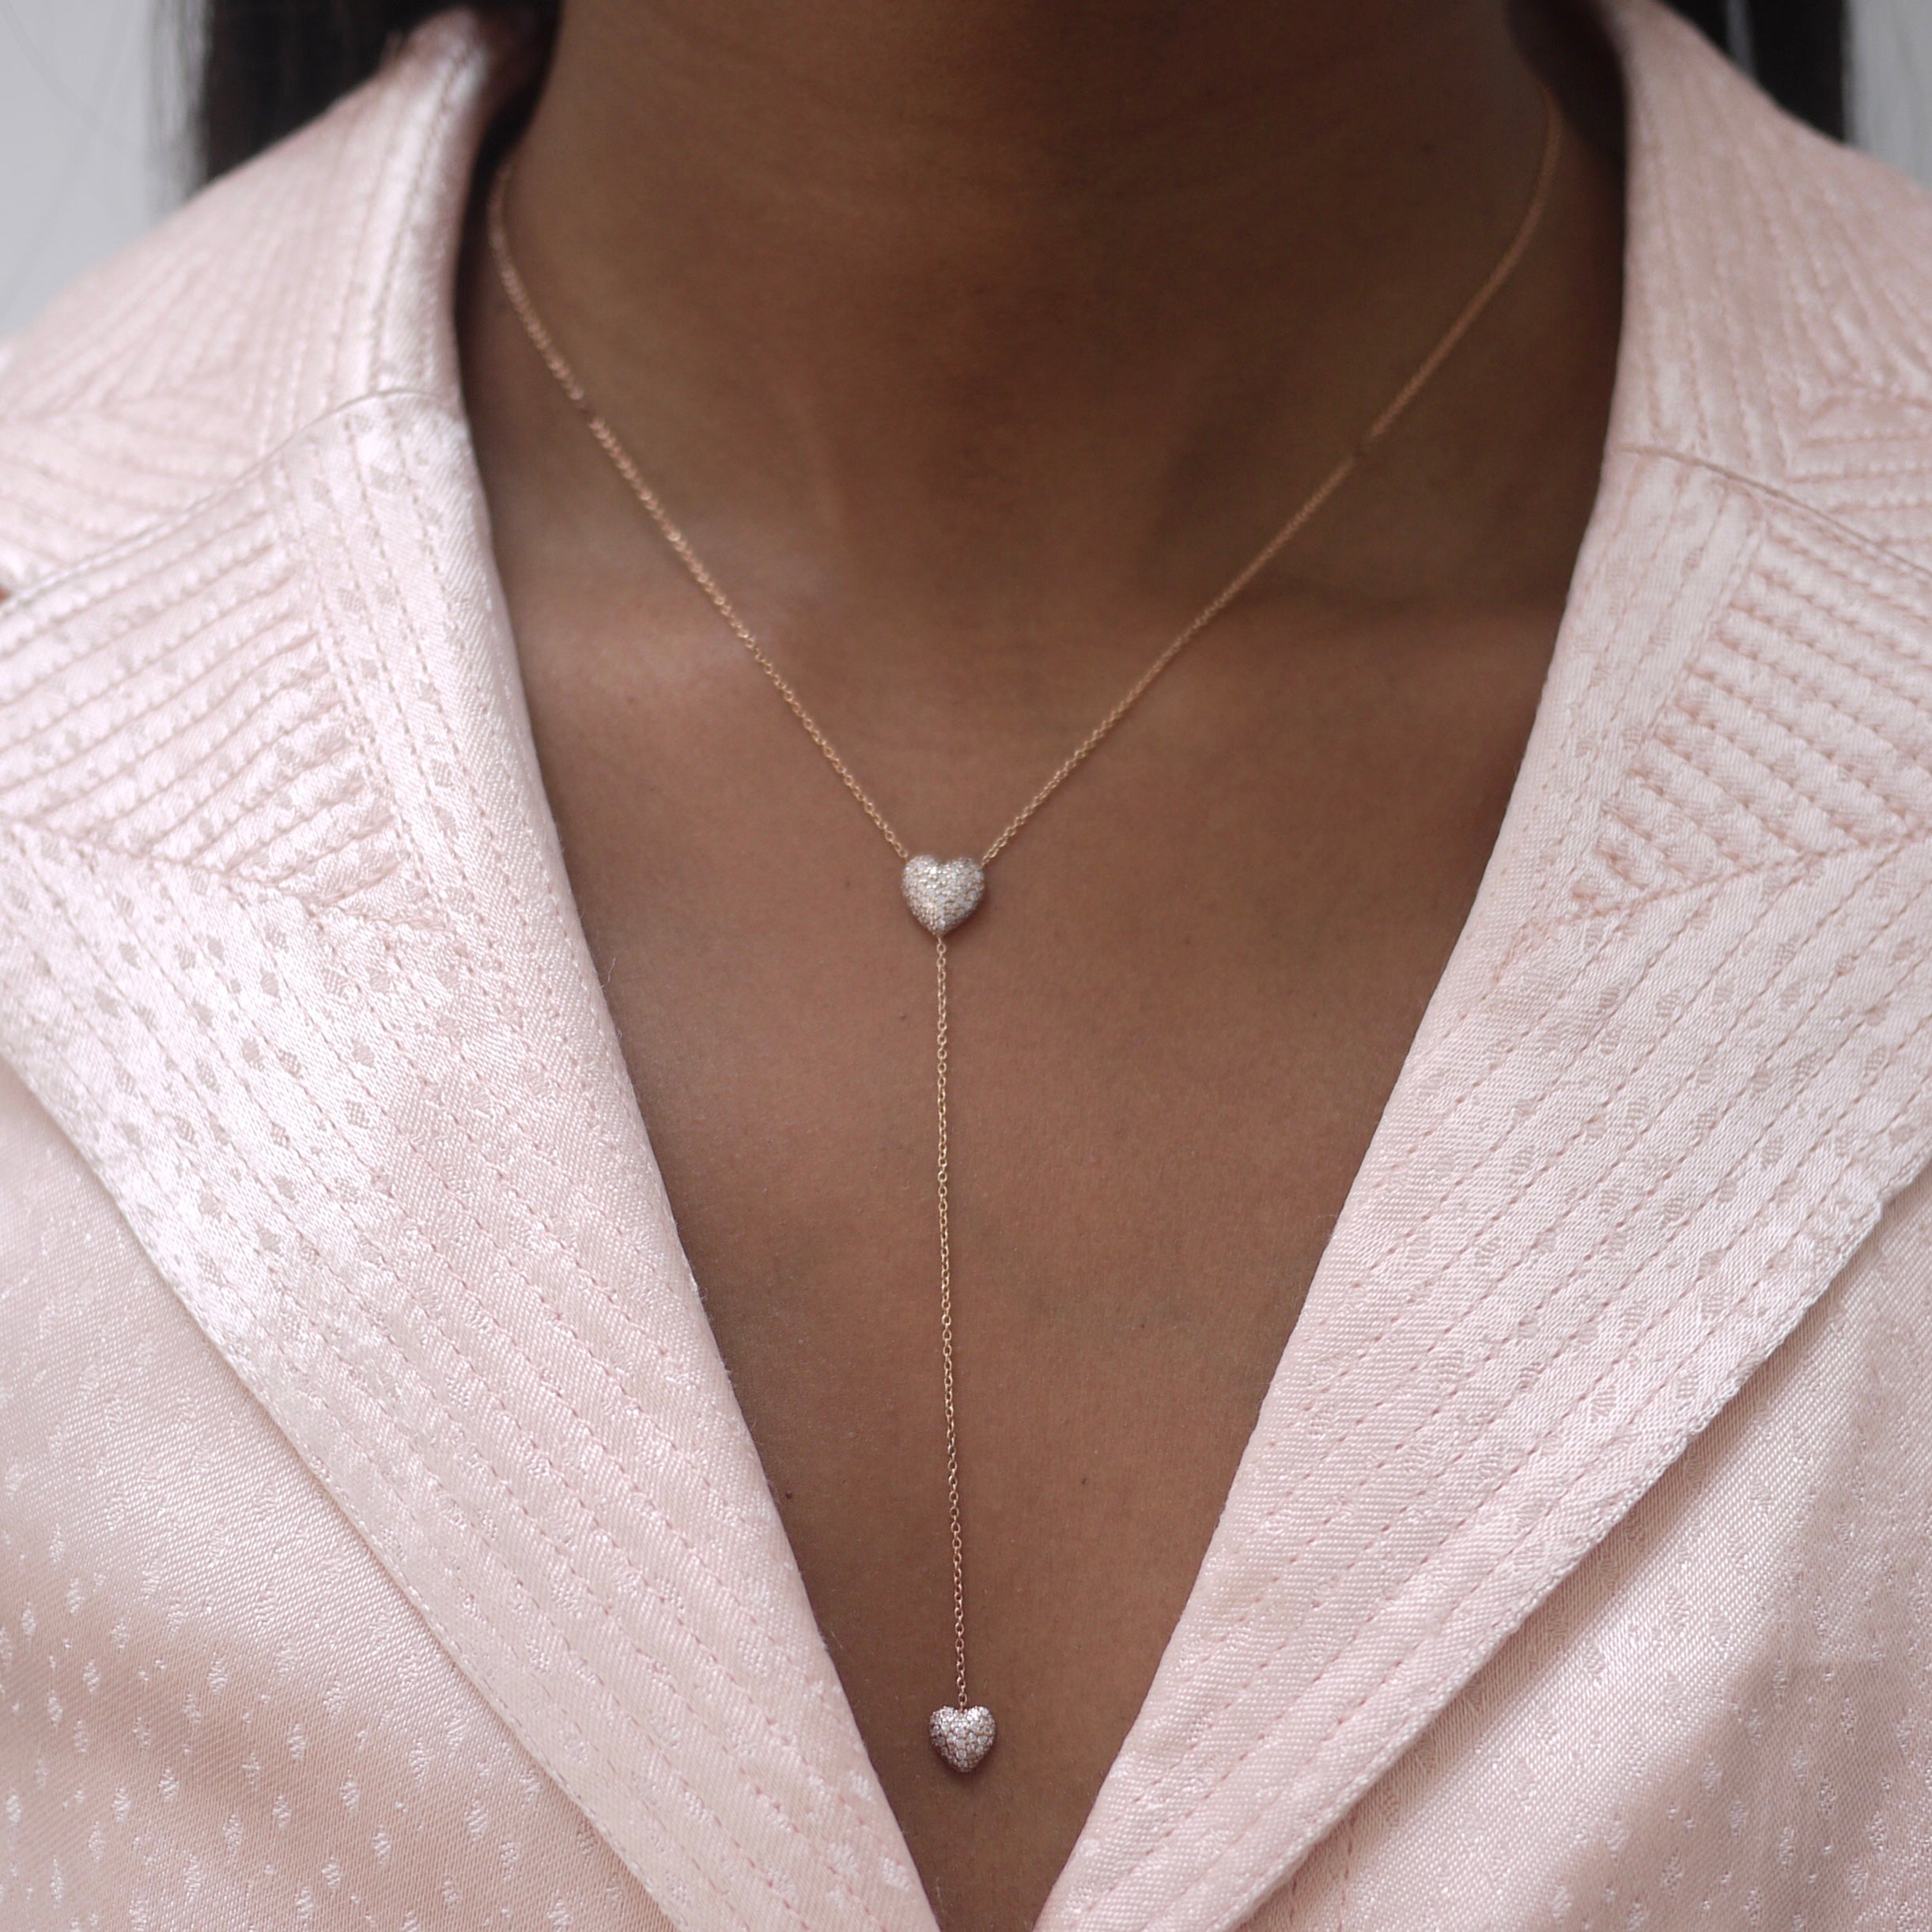 Sweetheart Lariat shown in rose gold.